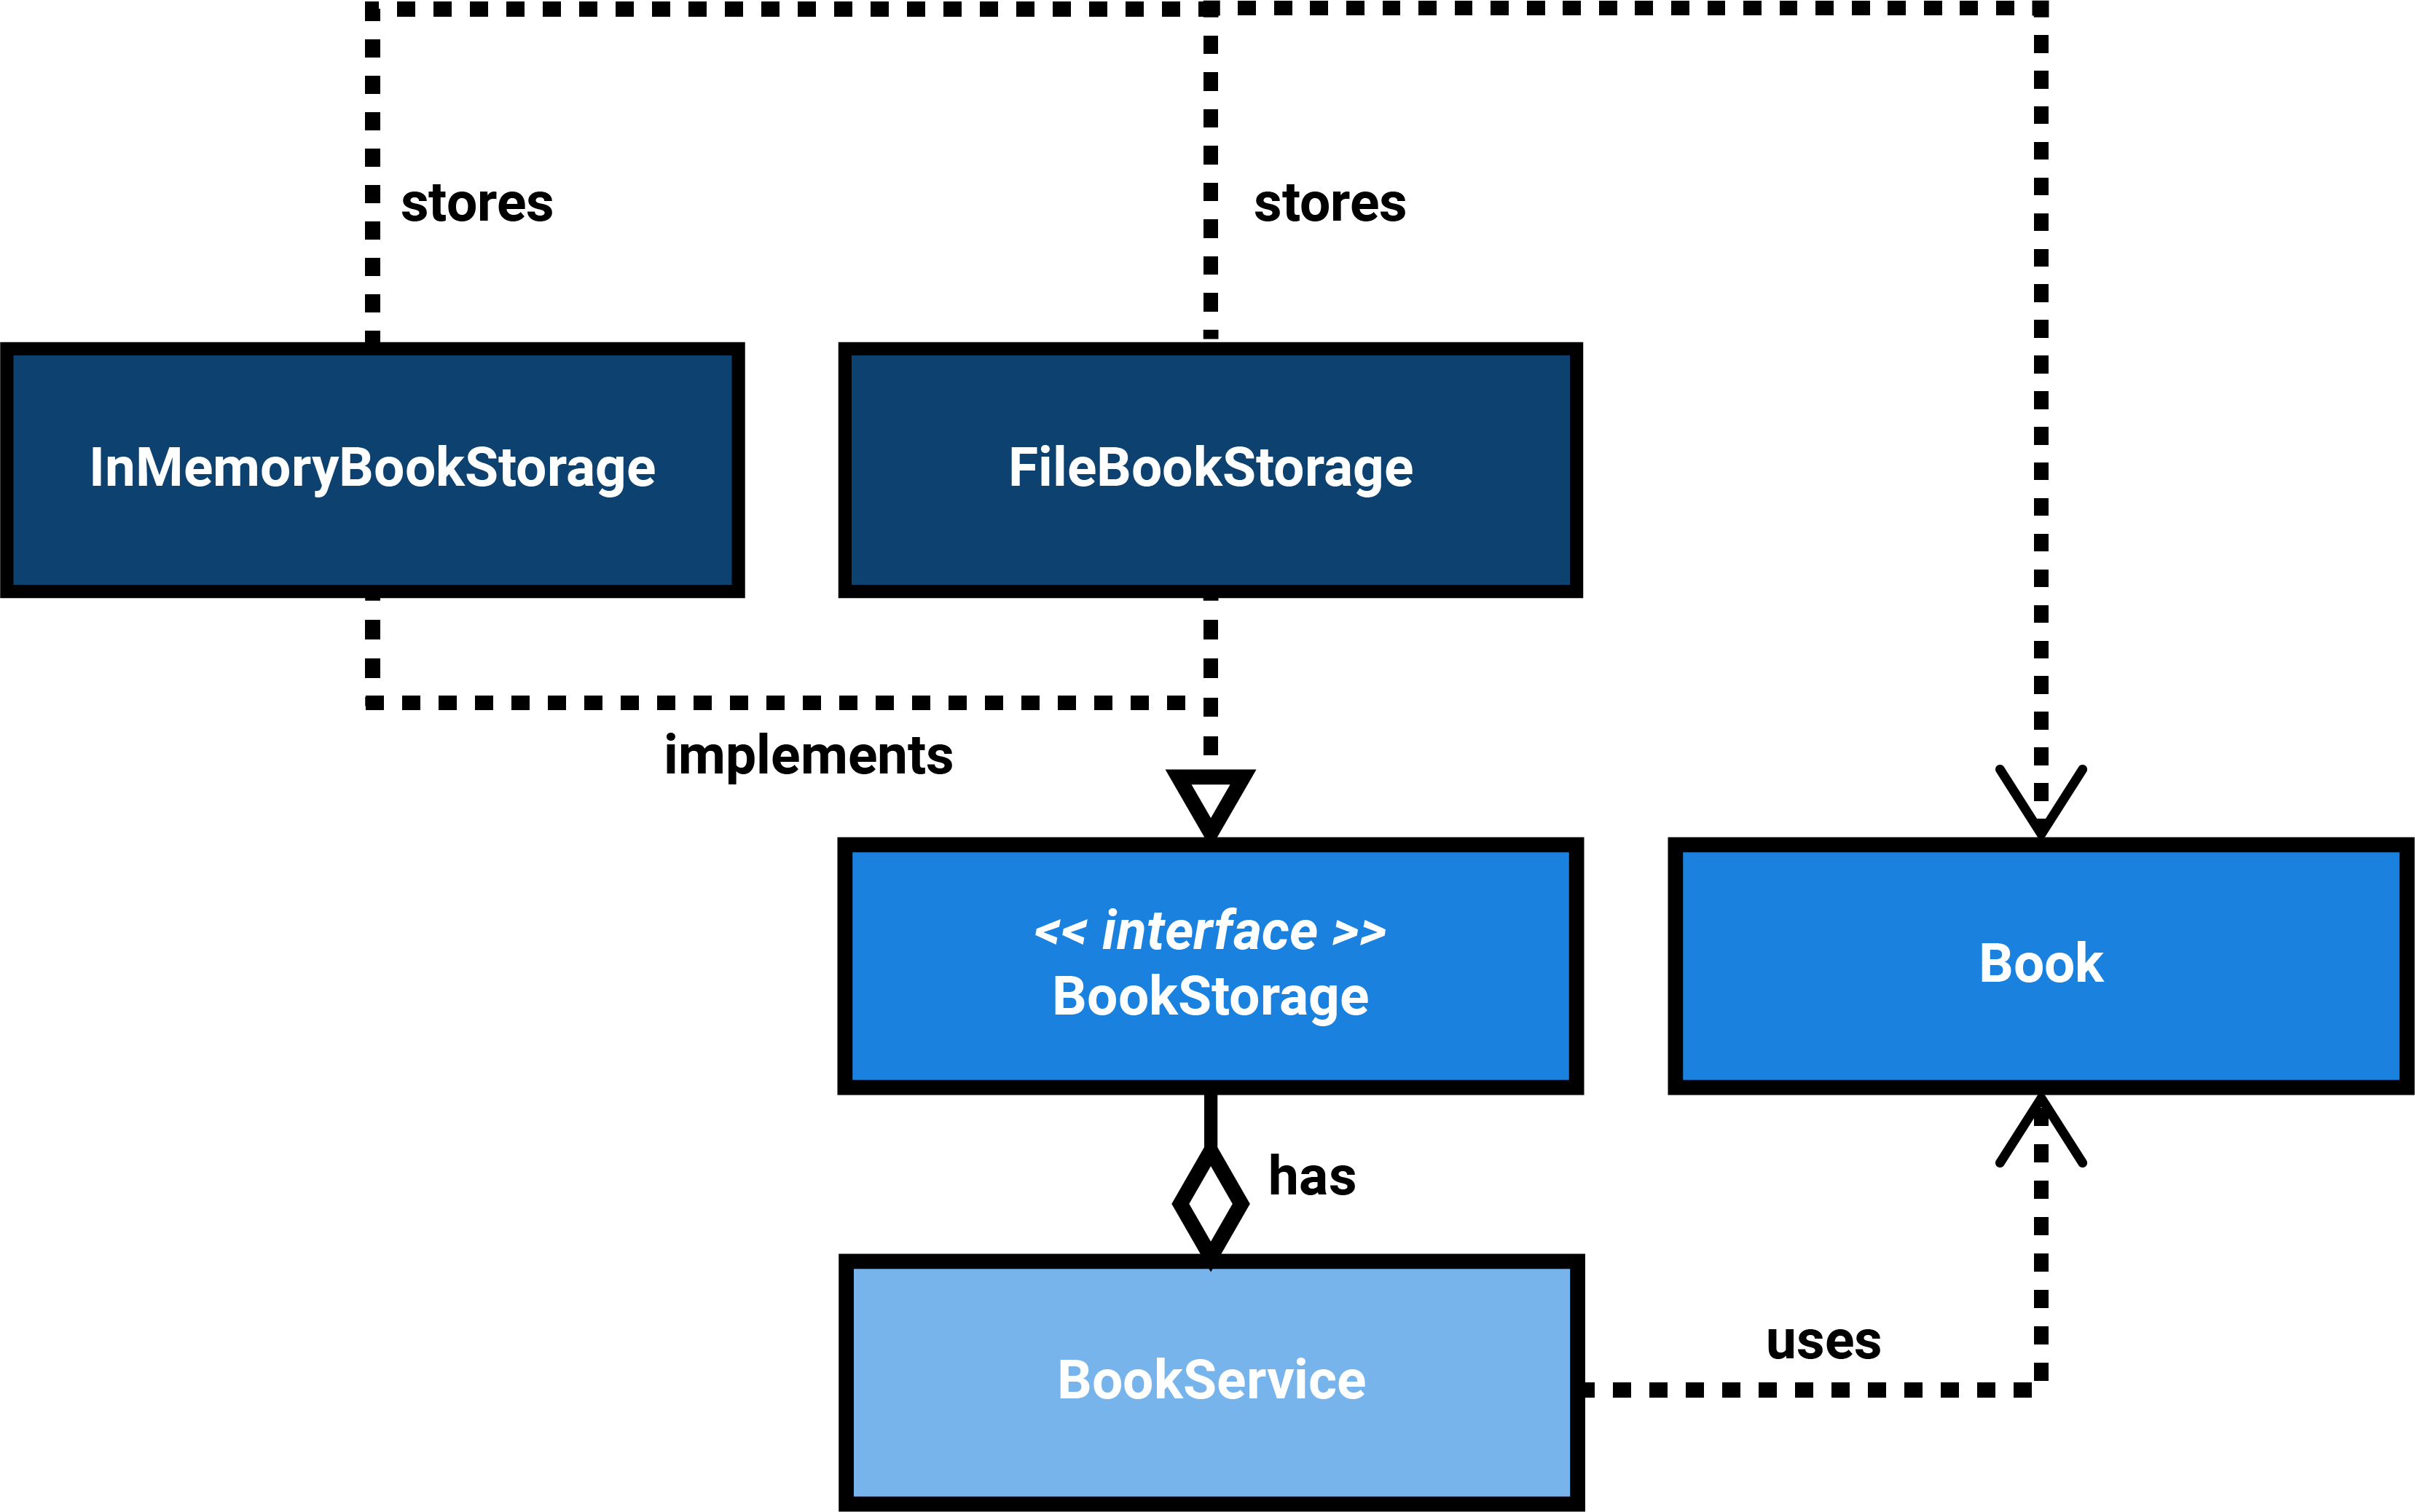 UML: The BookService depends on an interface: BookStorage. Both the InMemoryBookStorage and the FileBookStorage explicitly depend on the BookStorage interface.